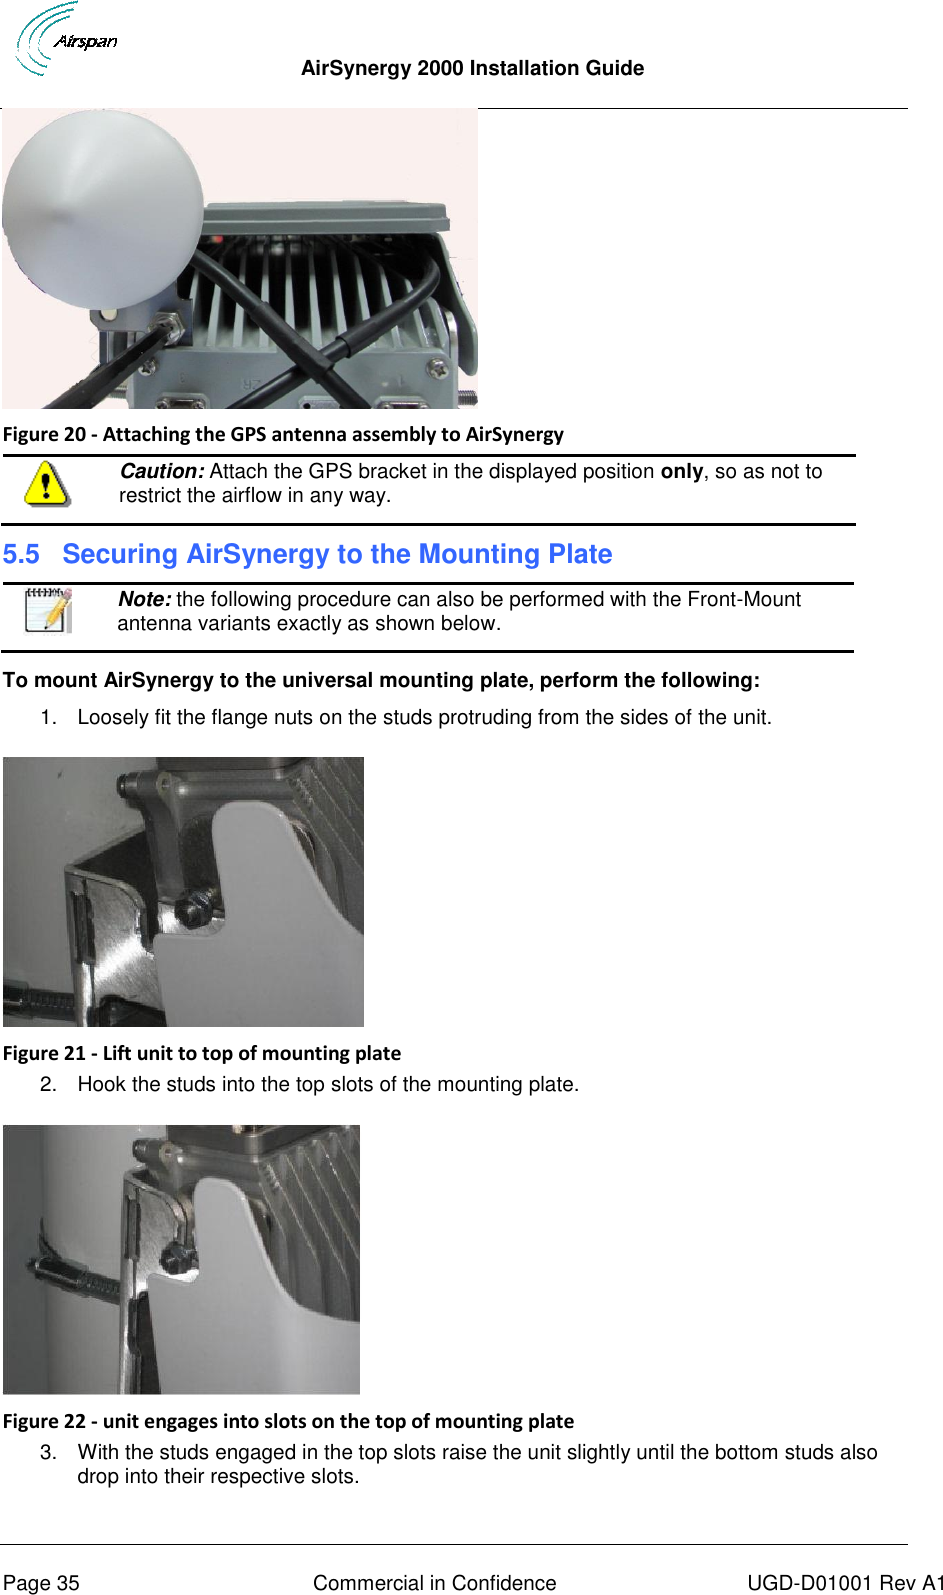  AirSynergy 2000 Installation Guide     Page 35  Commercial in Confidence  UGD-D01001 Rev A1  Figure 20 - Attaching the GPS antenna assembly to AirSynergy  Caution: Attach the GPS bracket in the displayed position only, so as not to restrict the airflow in any way. 5.5  Securing AirSynergy to the Mounting Plate  Note: the following procedure can also be performed with the Front-Mount antenna variants exactly as shown below.  To mount AirSynergy to the universal mounting plate, perform the following: 1.  Loosely fit the flange nuts on the studs protruding from the sides of the unit.    Figure 21 - Lift unit to top of mounting plate 2.  Hook the studs into the top slots of the mounting plate.   Figure 22 - unit engages into slots on the top of mounting plate 3.  With the studs engaged in the top slots raise the unit slightly until the bottom studs also drop into their respective slots. 